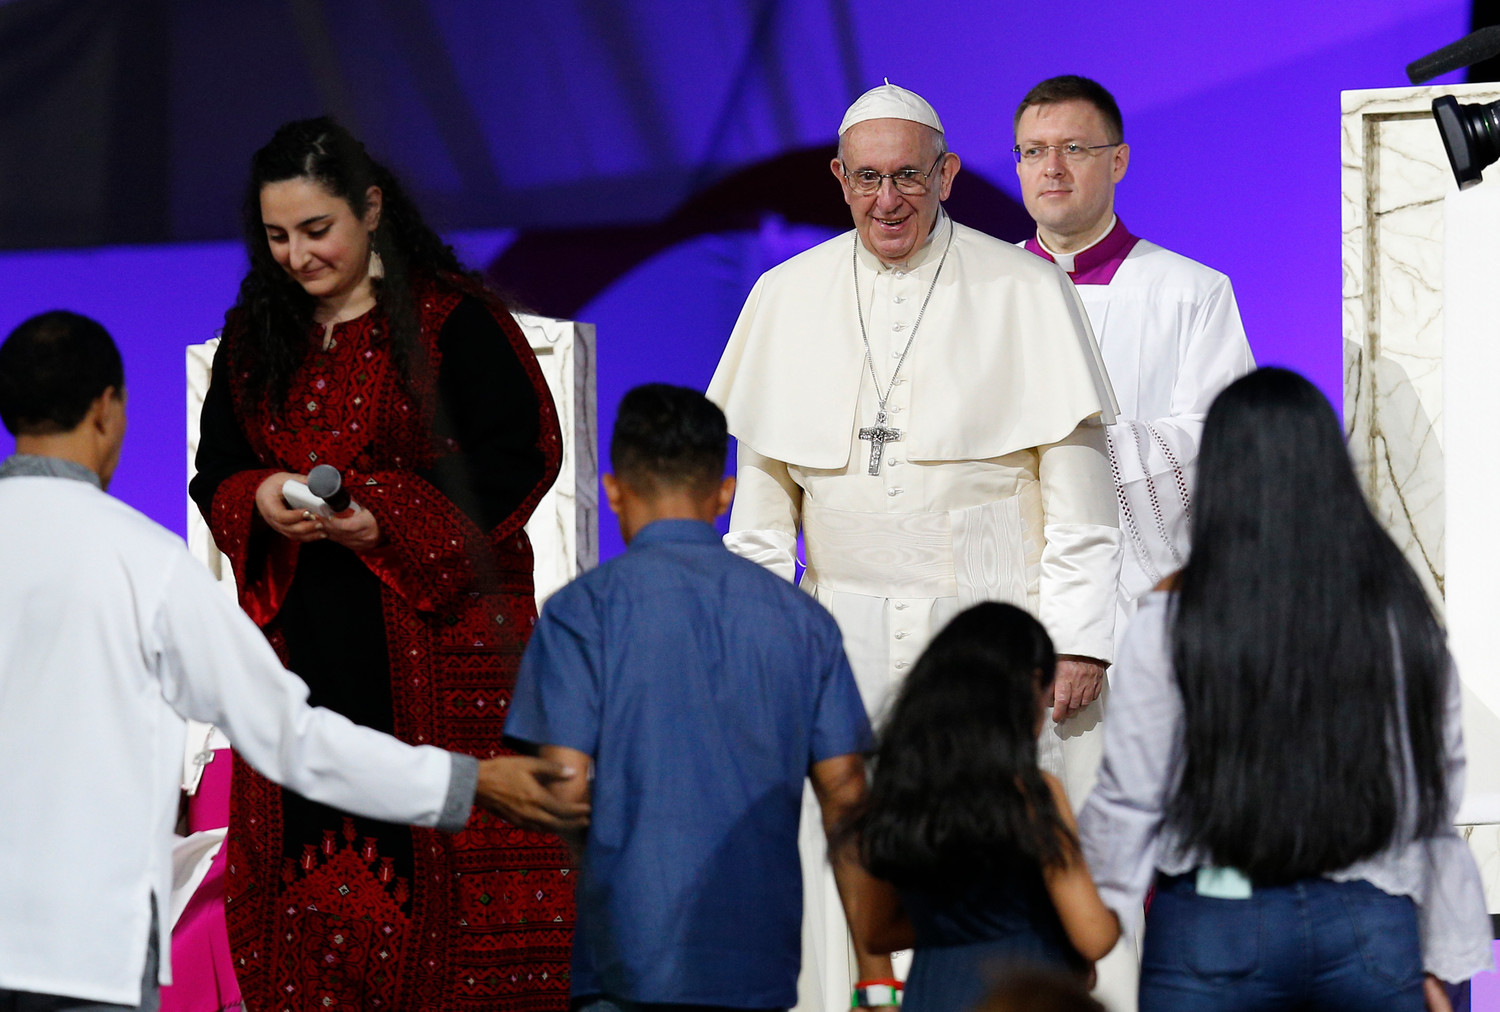 Pope Francis greets families during the World Youth Day prayer vigil at St. John Paul II Field in Panama City Jan. 26, 2019.